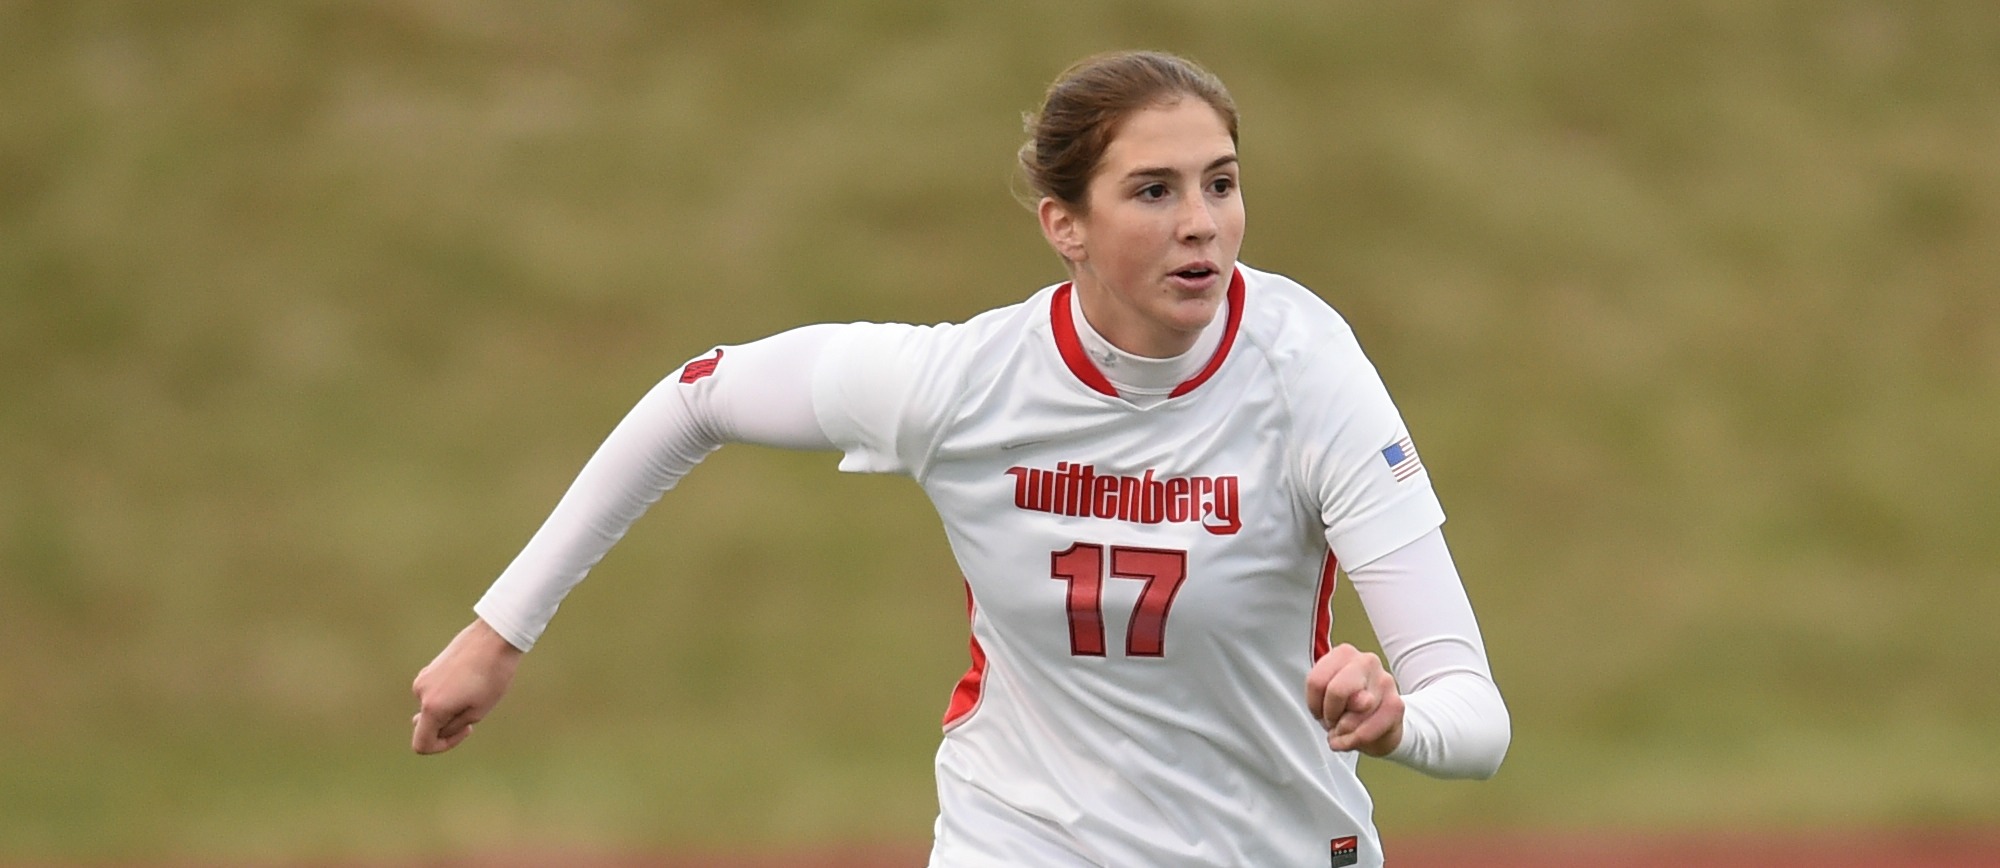 Wittenberg Holds Off OWU 1-0 on Homecoming